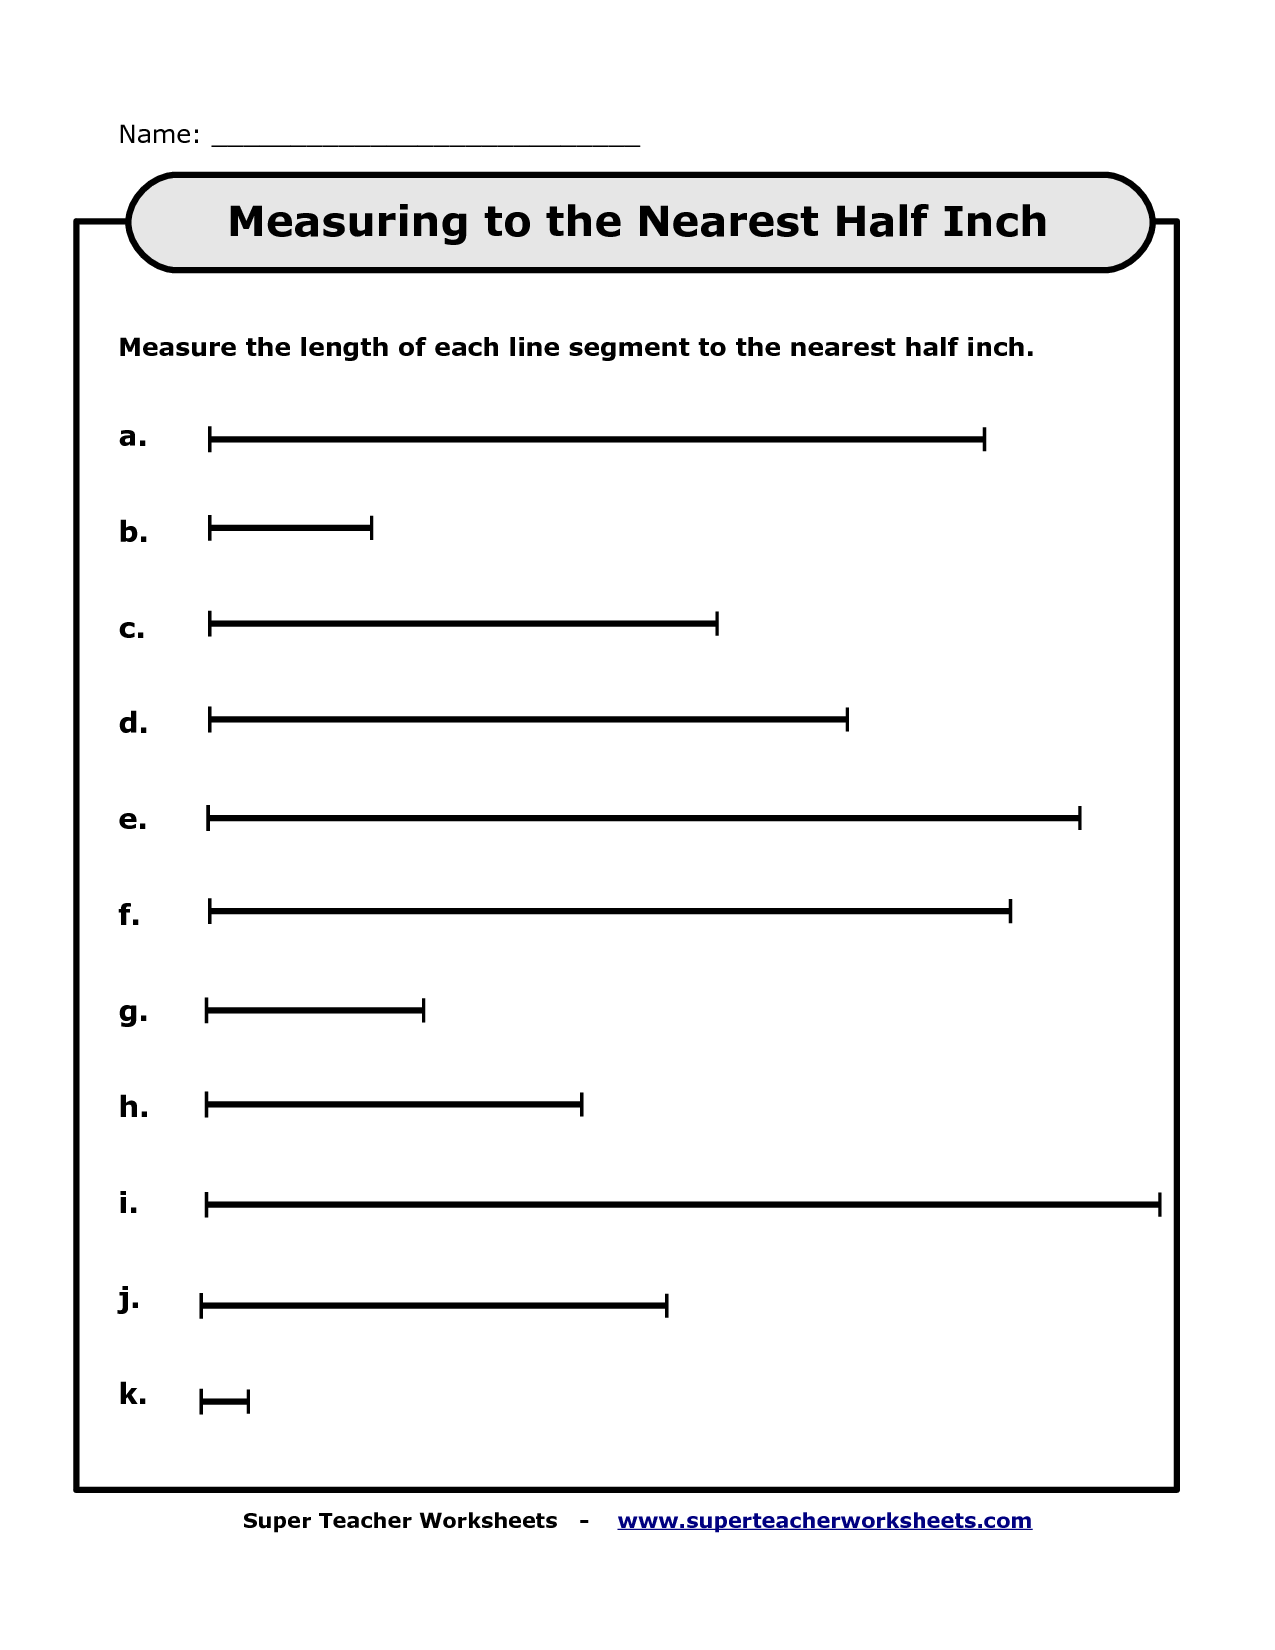 13-best-images-of-measurement-inches-worksheets-measuring-in-inches